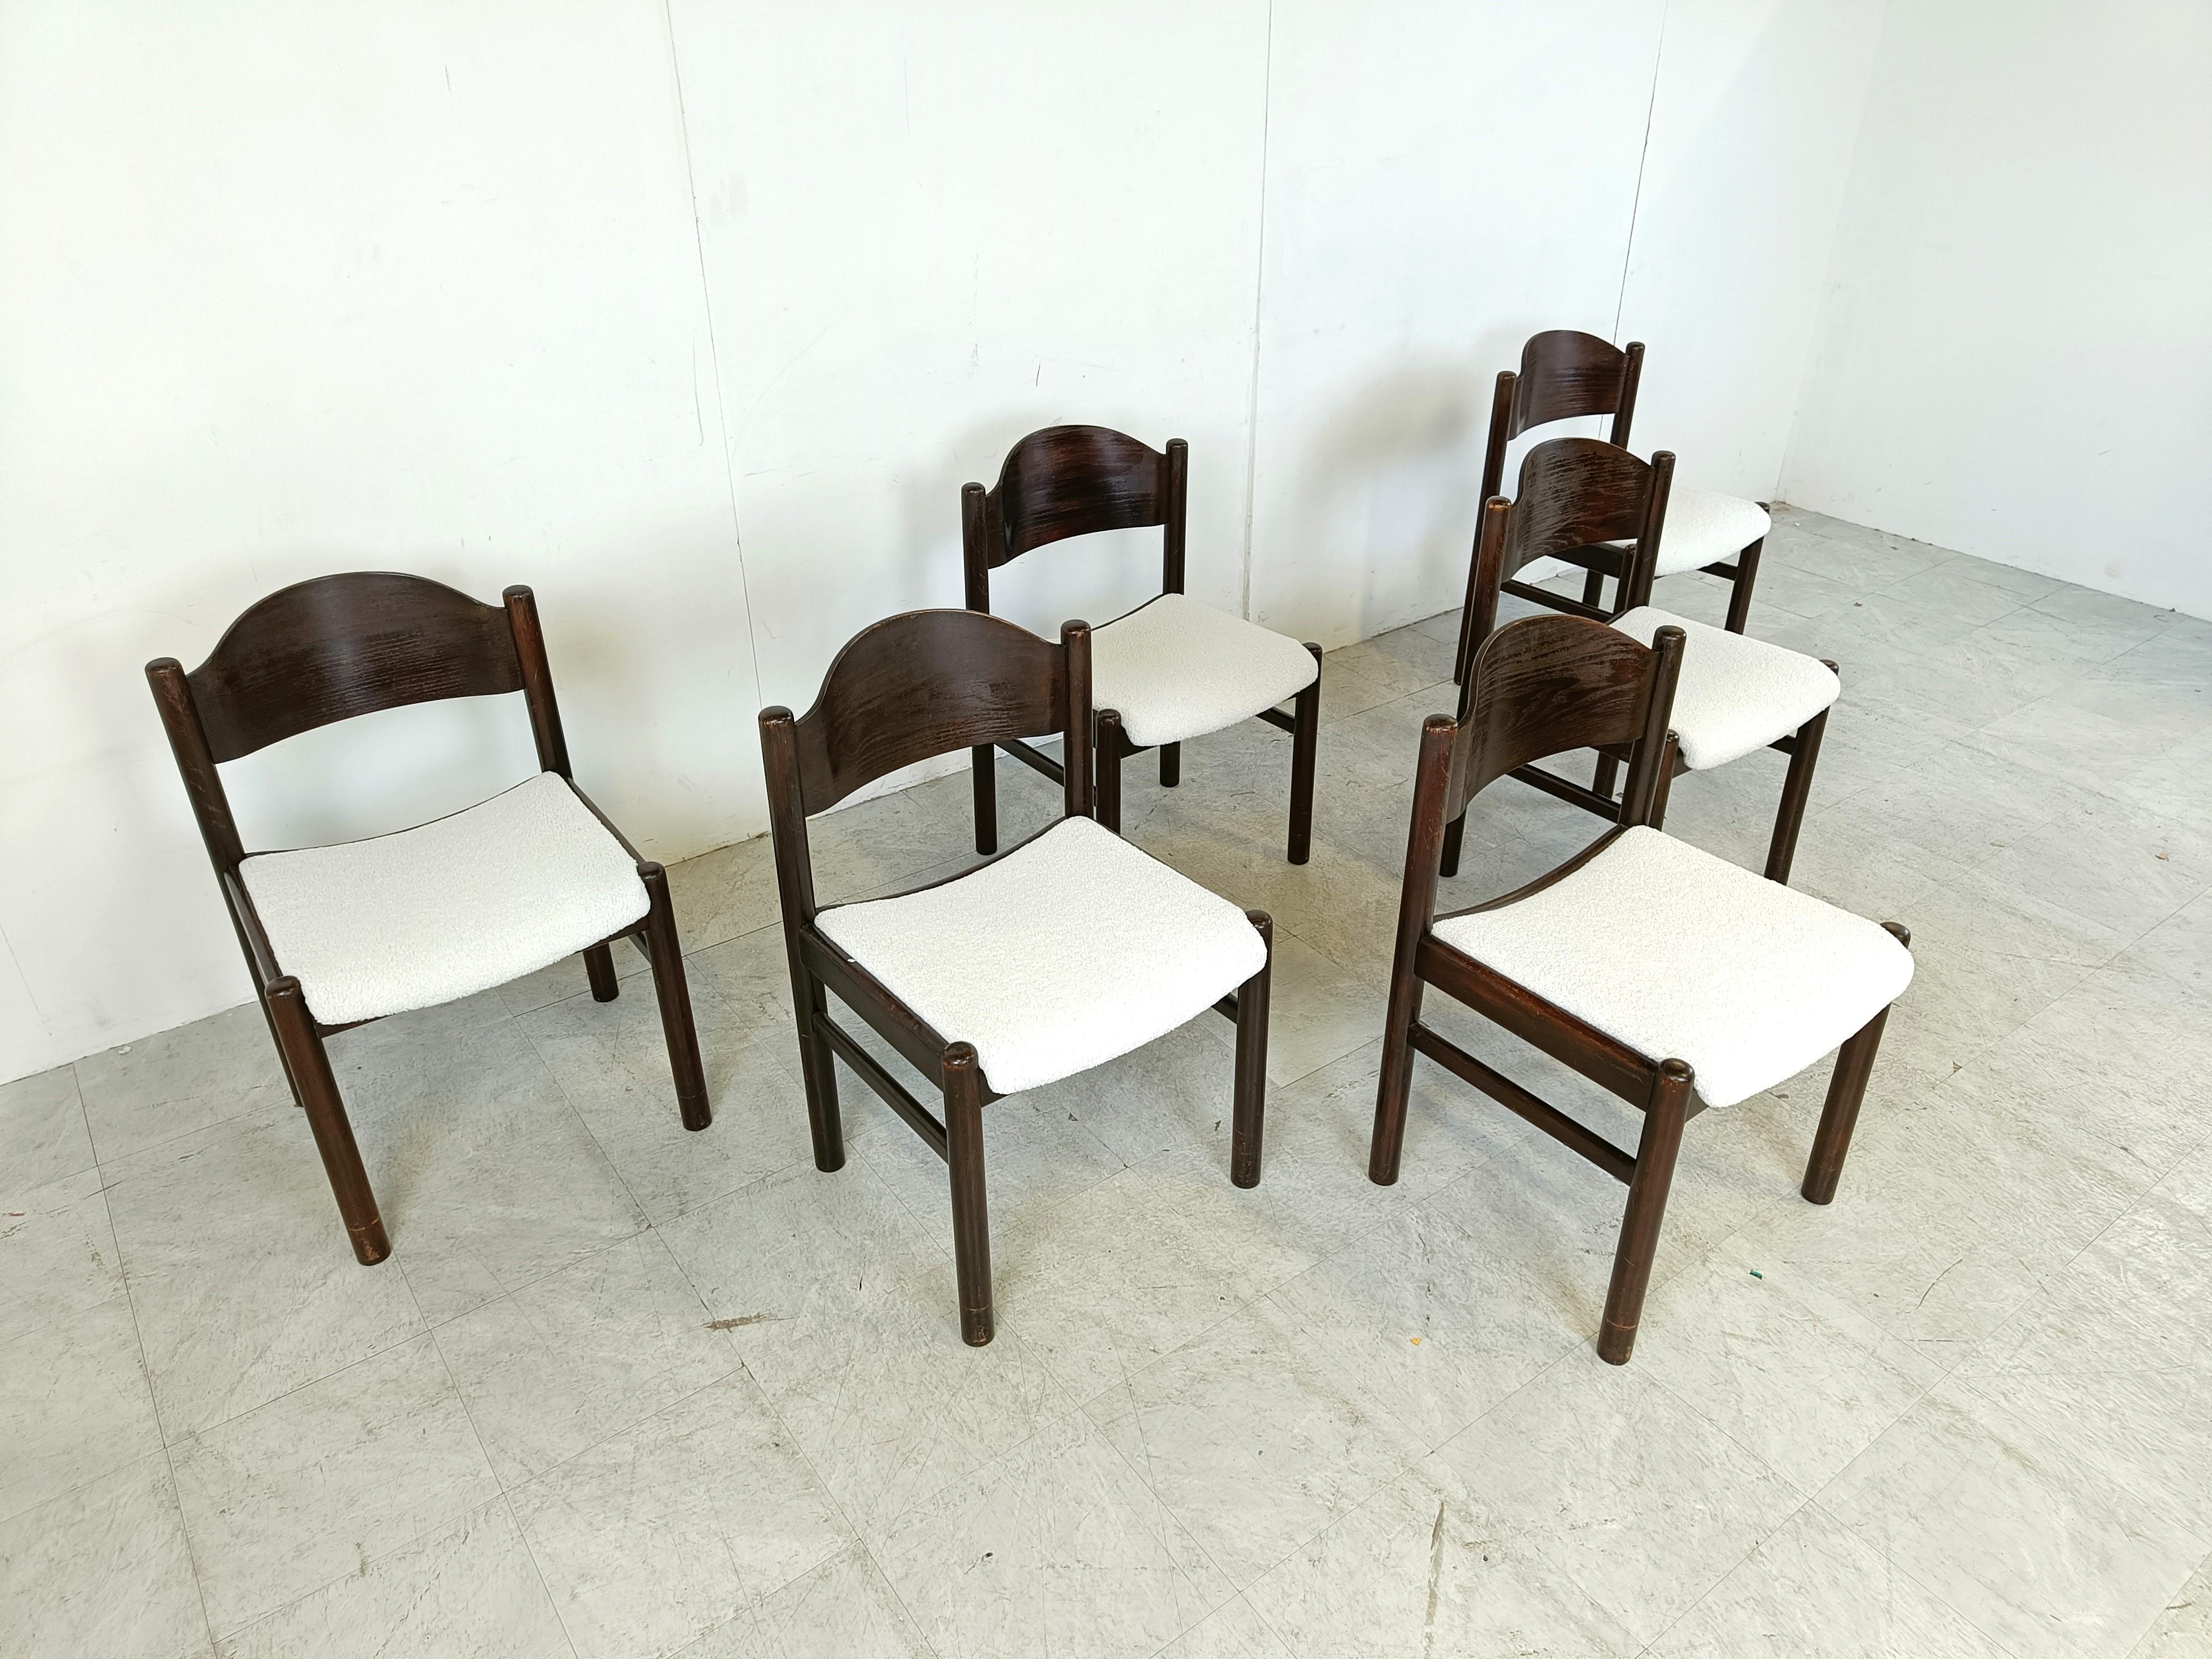 Vintage brutalist dining chairs, set of 6 - 1960s For Sale 2